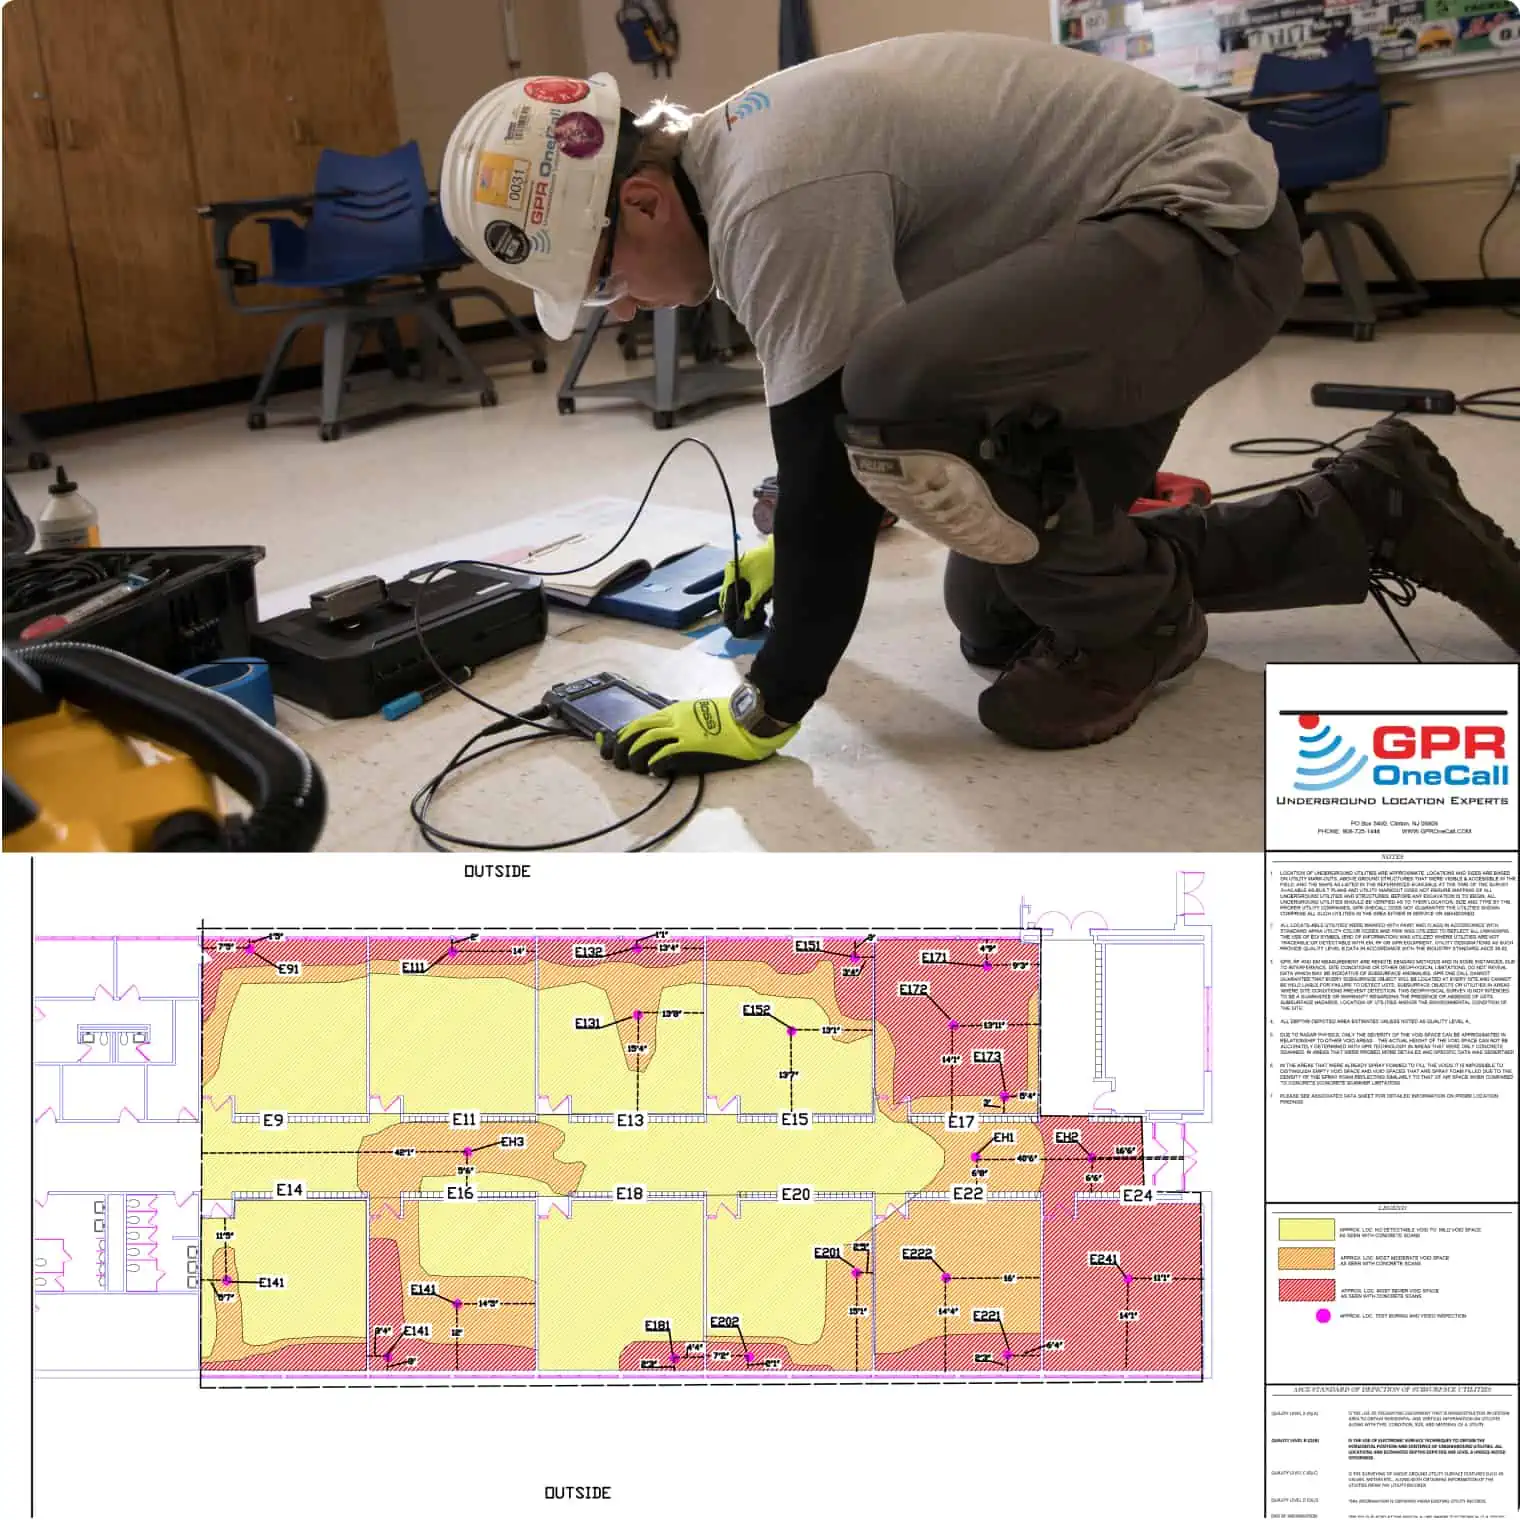 Utility Detection Preparation with GPR Tools and Site Plan